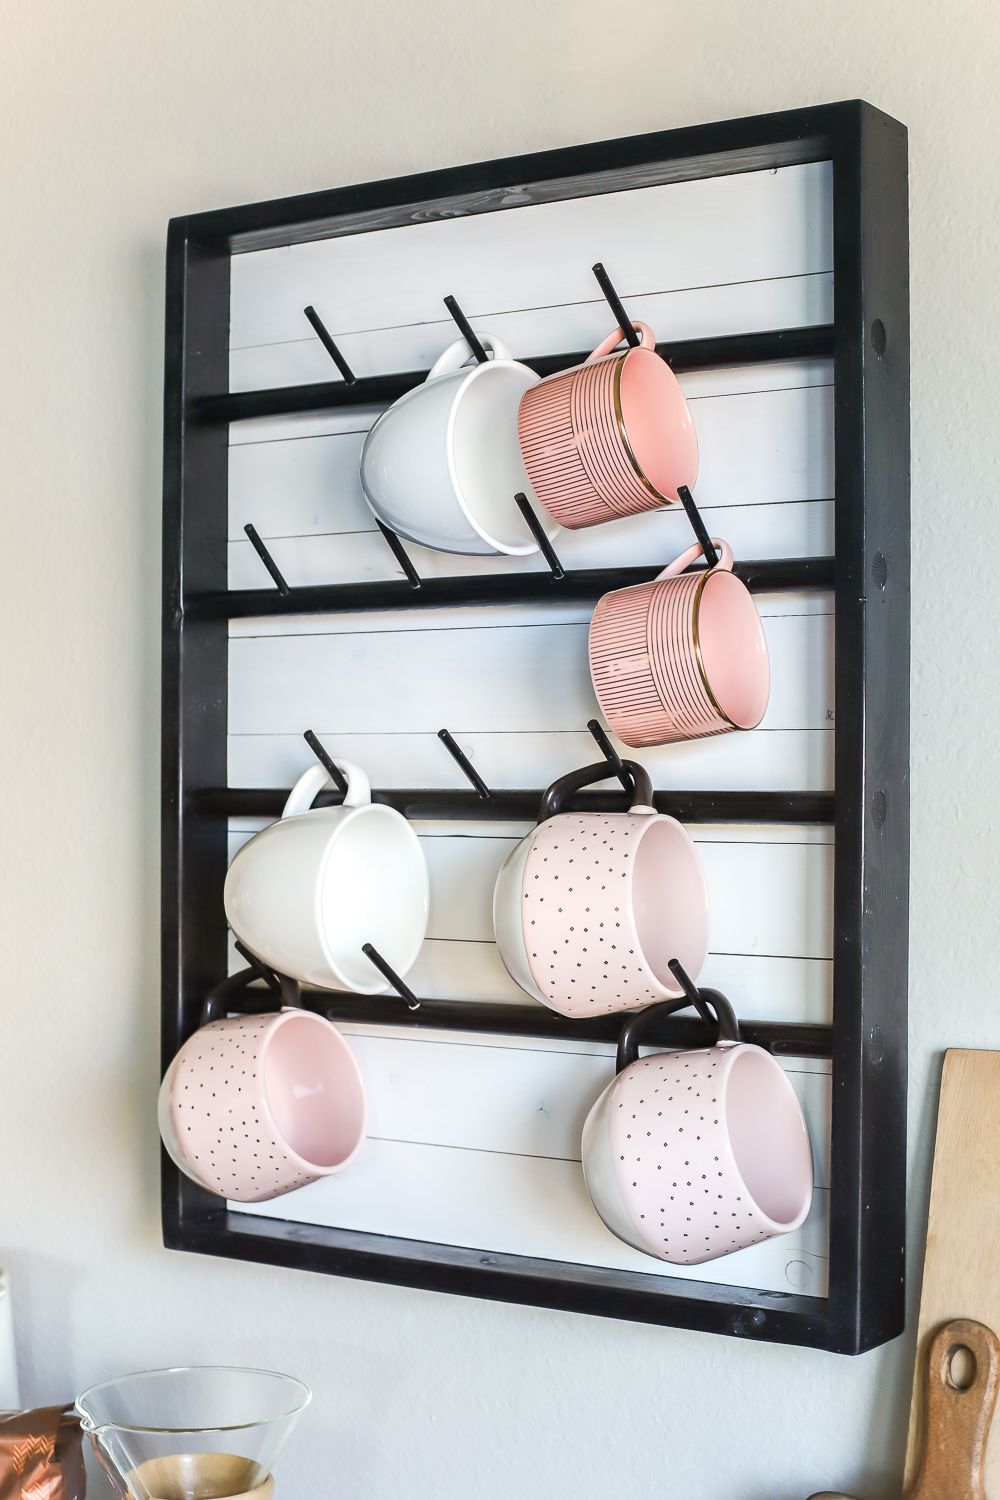 How To Make A DIY Wall-Mounted Coffee Mug Display Rack -   13 diy projects For College for the home ideas